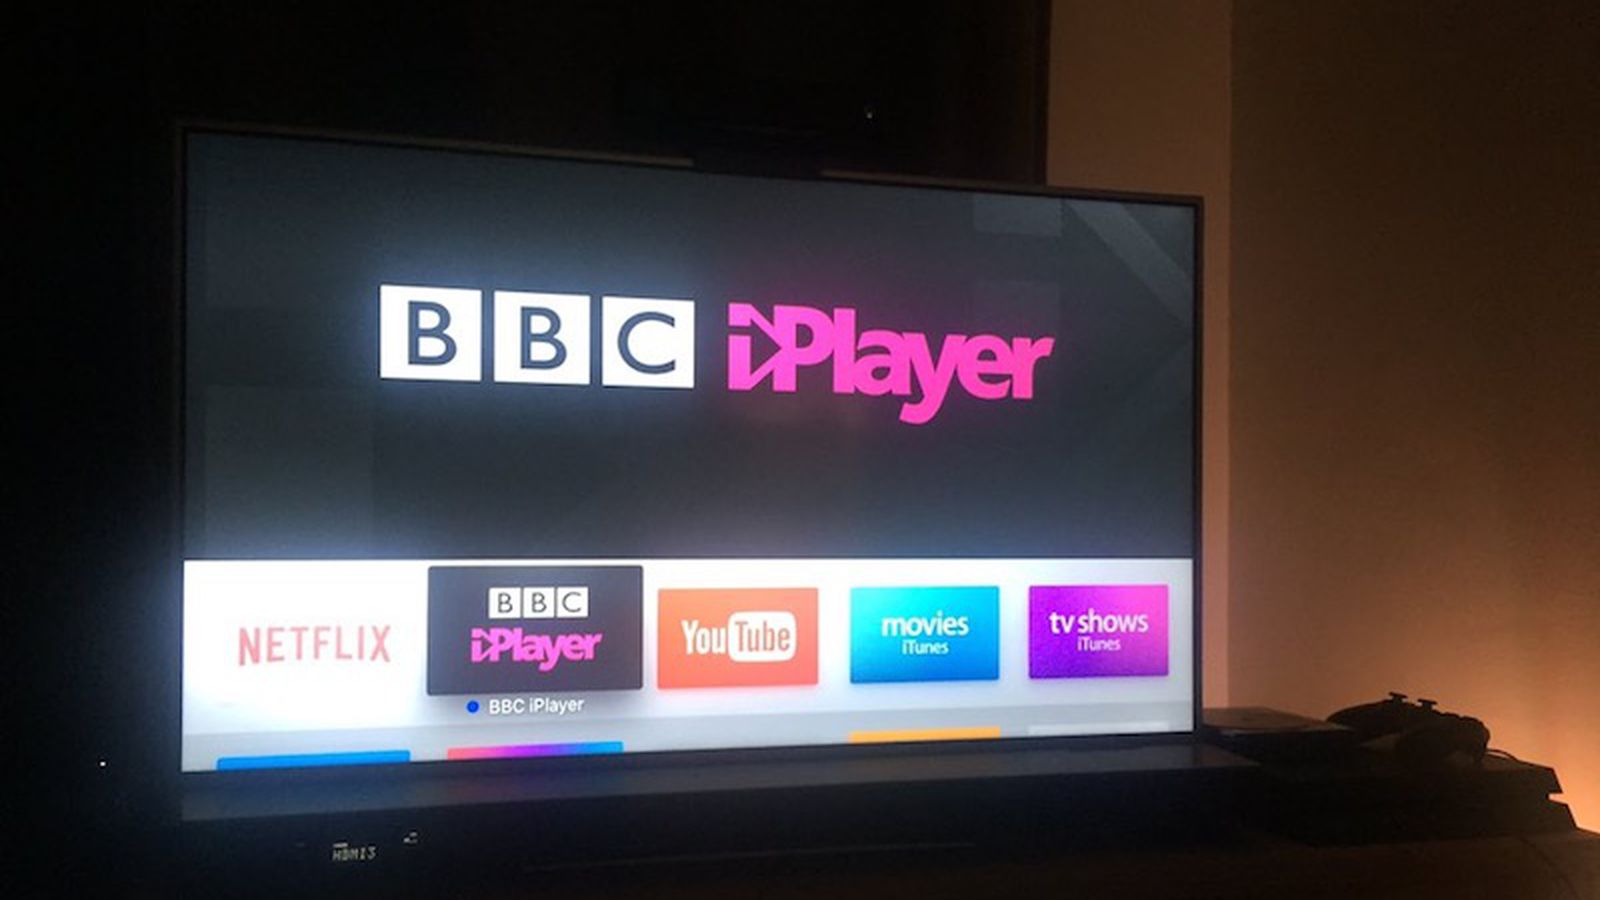 BBC iPlayer Goes Live New Apple TV in the -